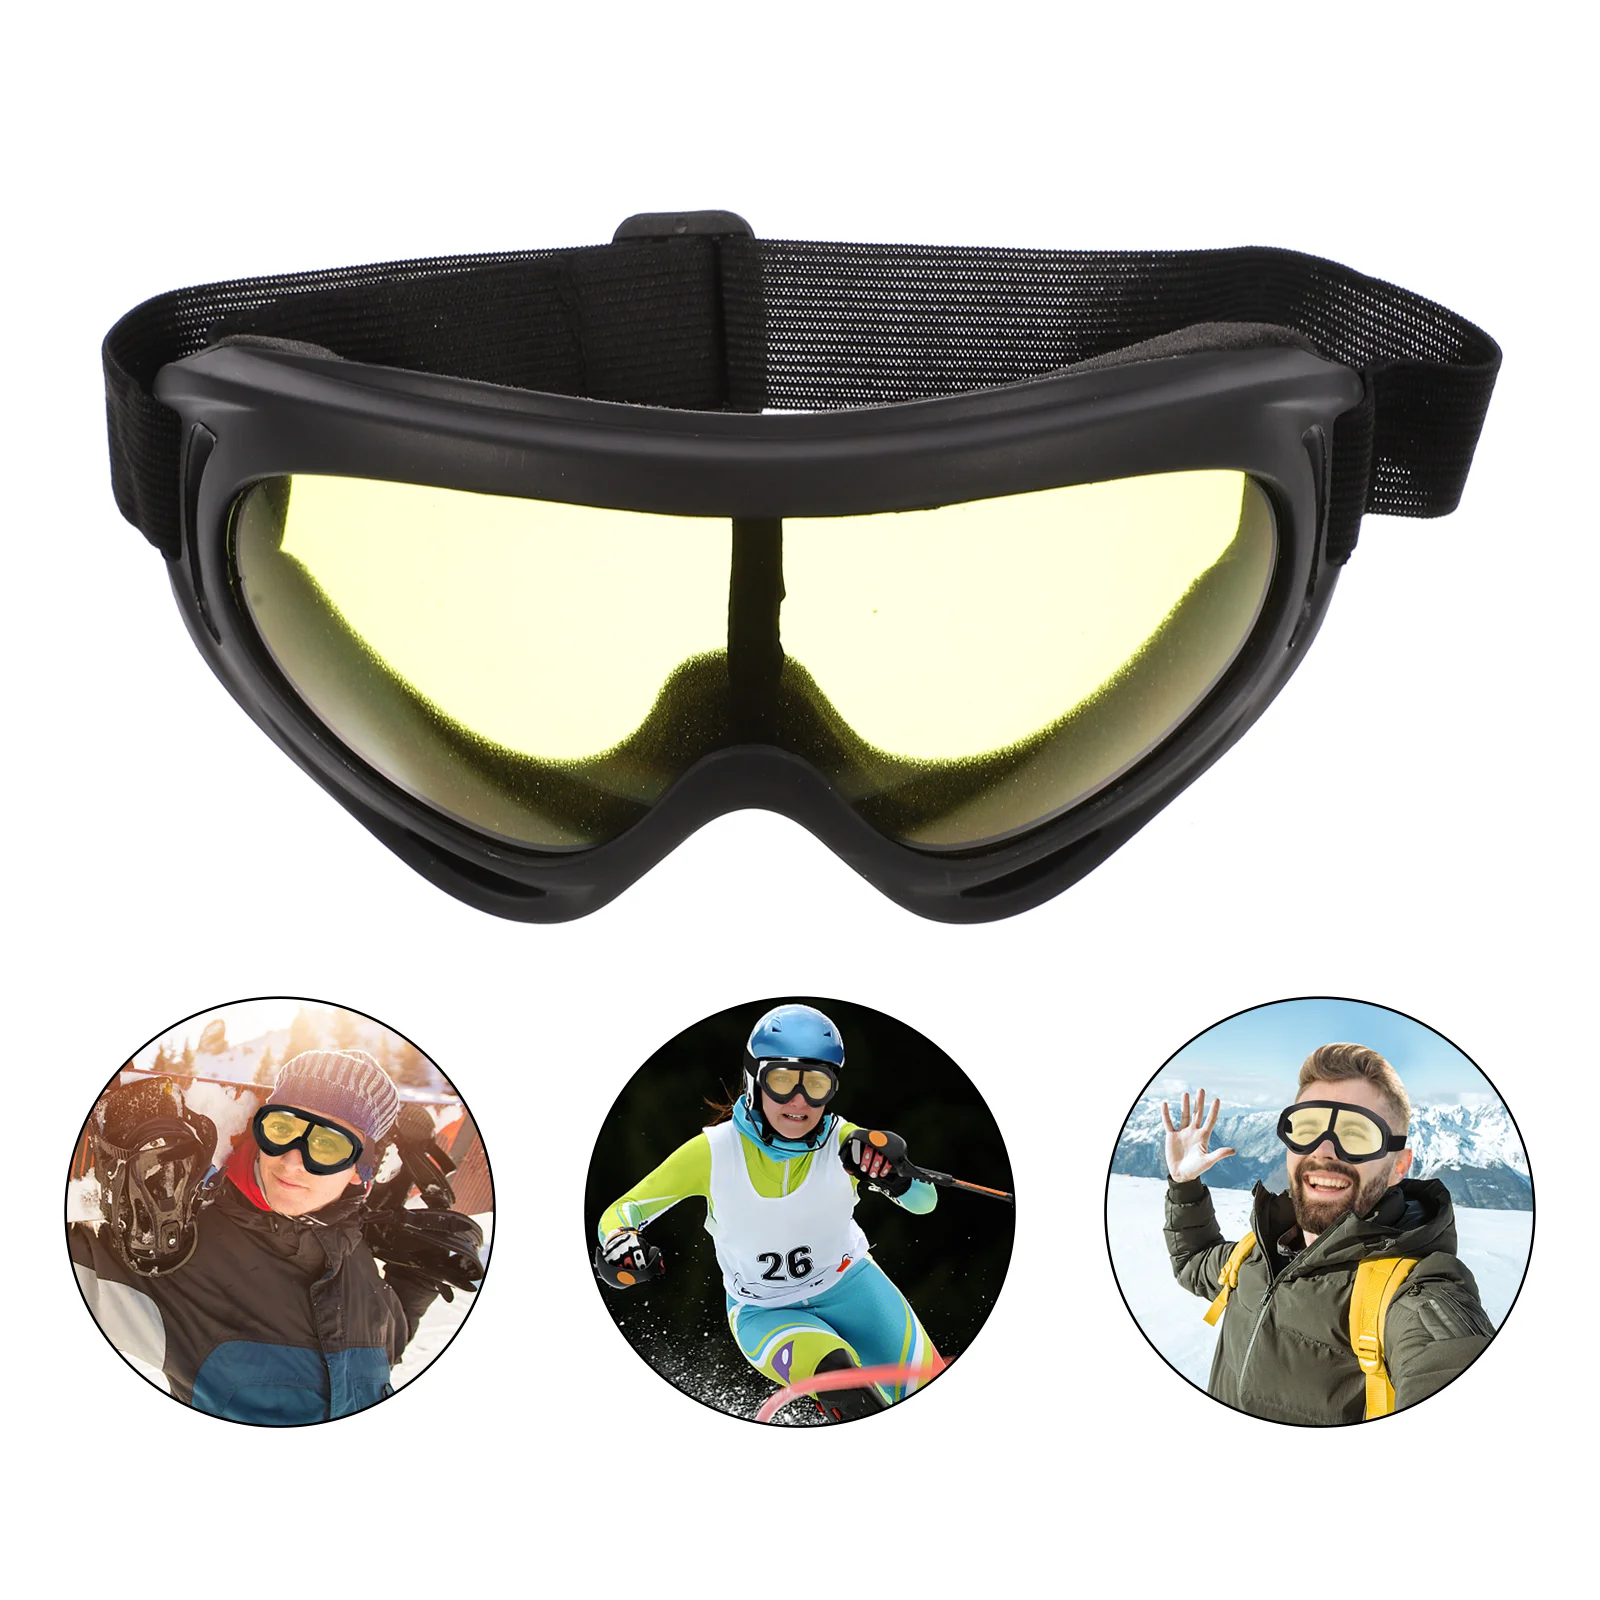 

Windproof Glasses Riding Eyewear Goggle Eyeglasses Bike Protective Goggles Skiing off Road Outdoor Event Aldult